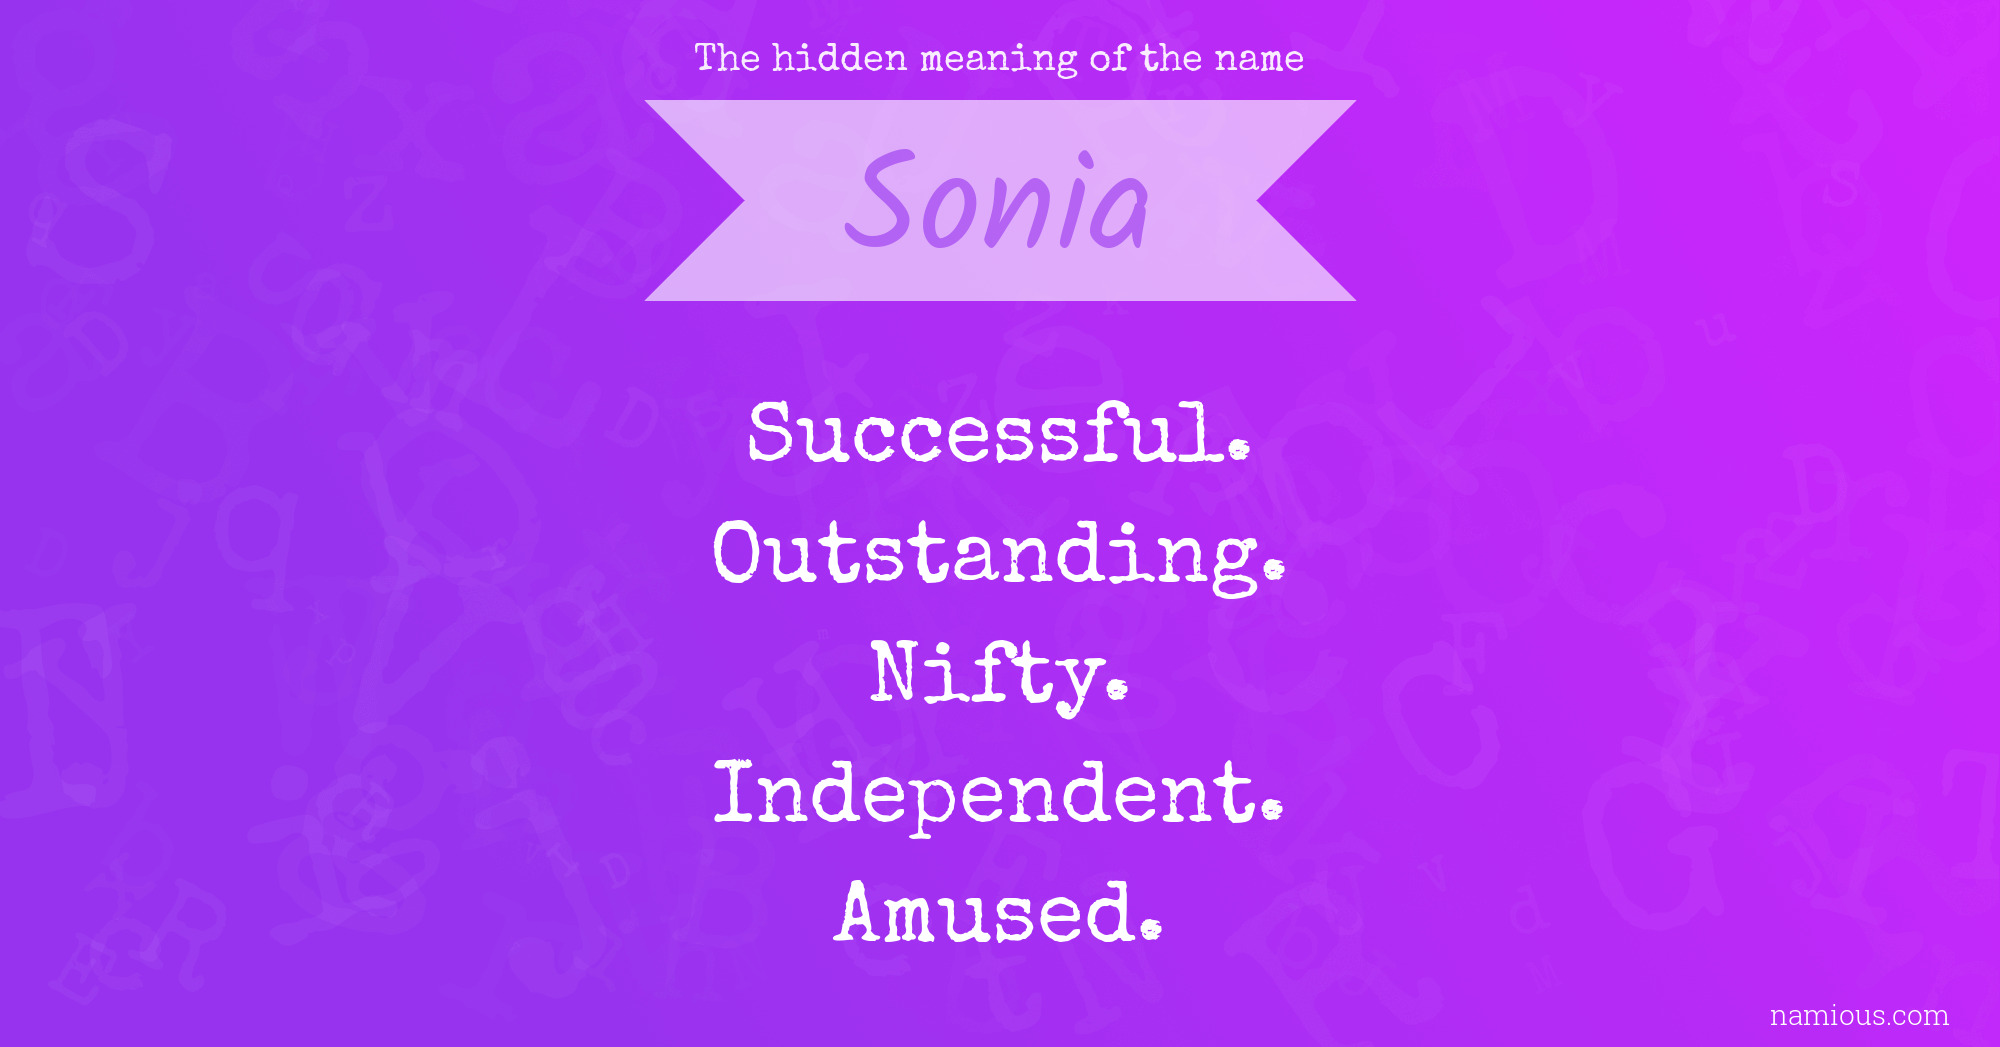 The hidden meaning of the name Sonia